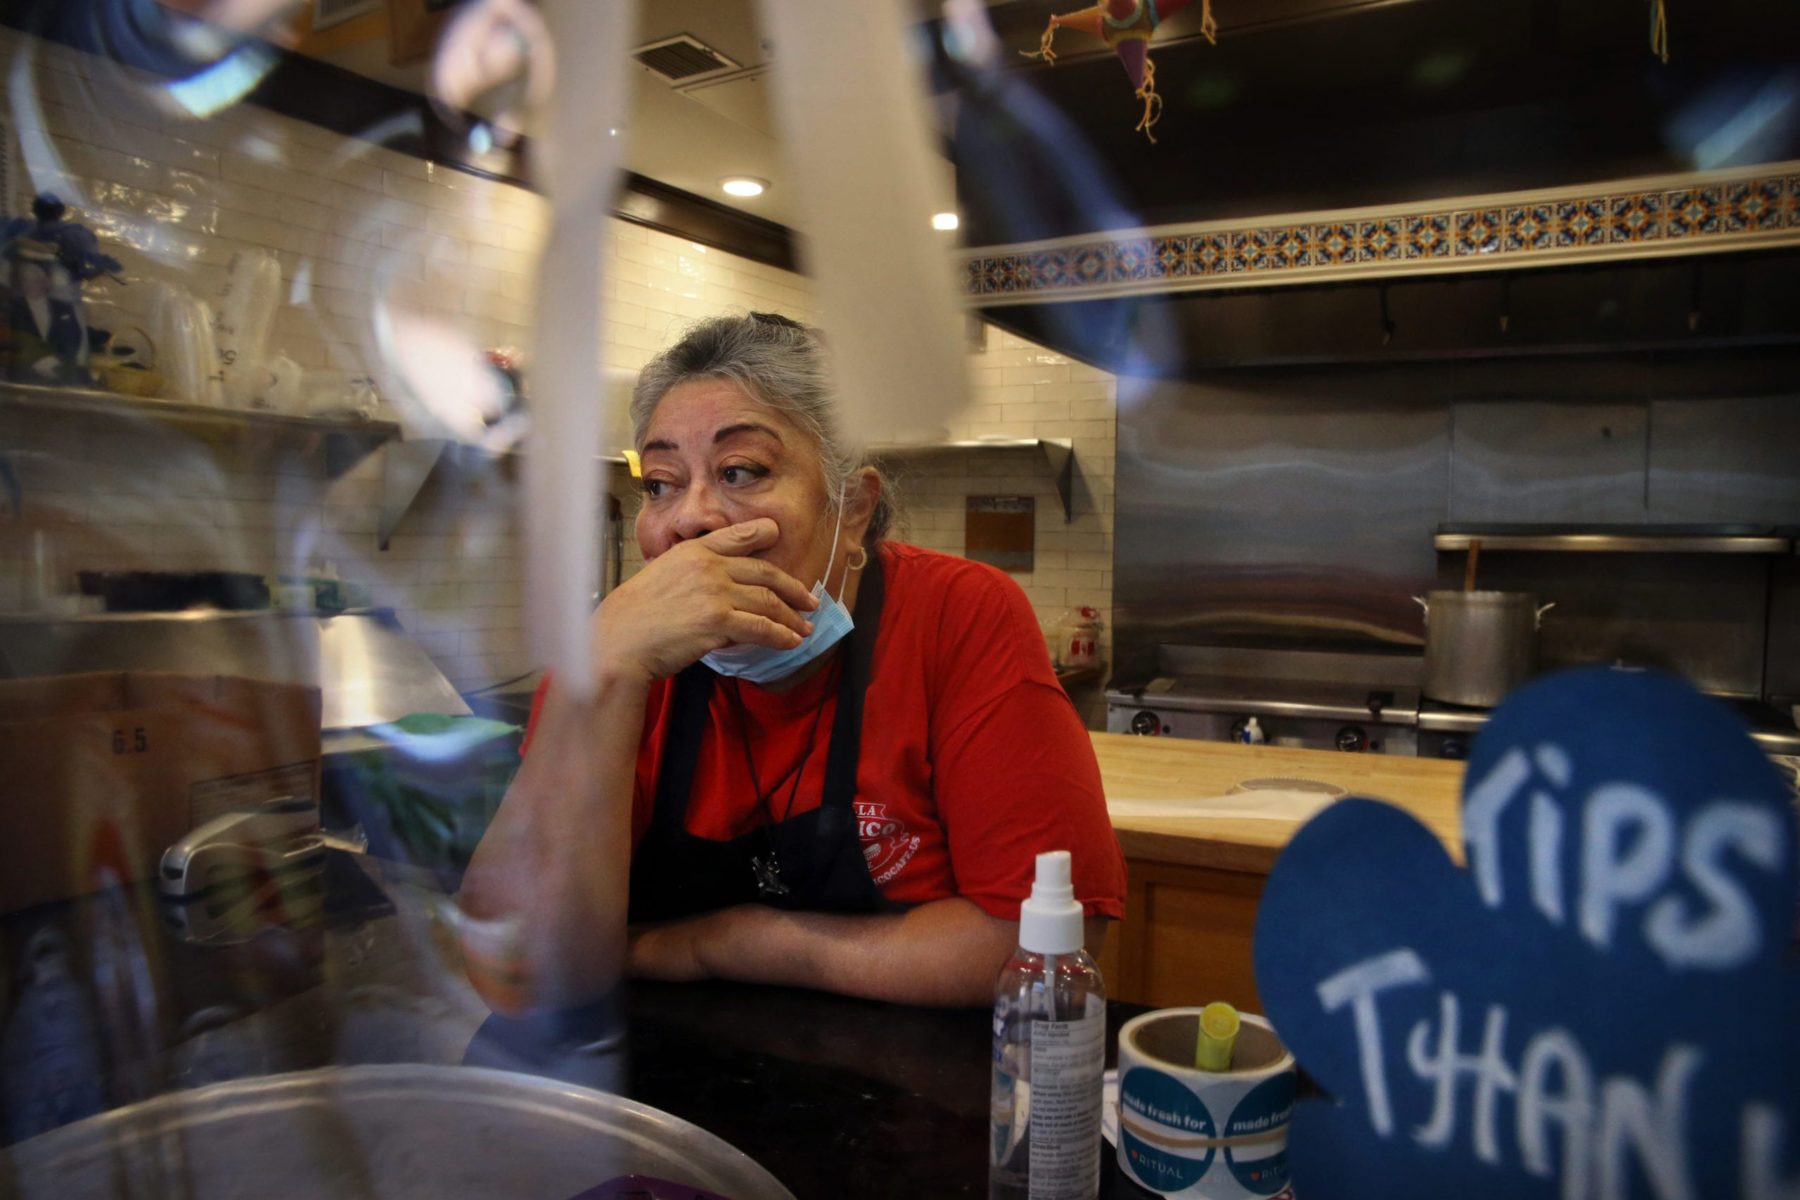 Owner Julie King, in a red shirt covered by an apron, holds back tears at Villa Mexico Cafe on Water Street in Boston, MA. A customer had just walked out while she was on the phone with another customer who was trying to negotiate the price of an order. Having lost two customers in a matter of minutes she said, 